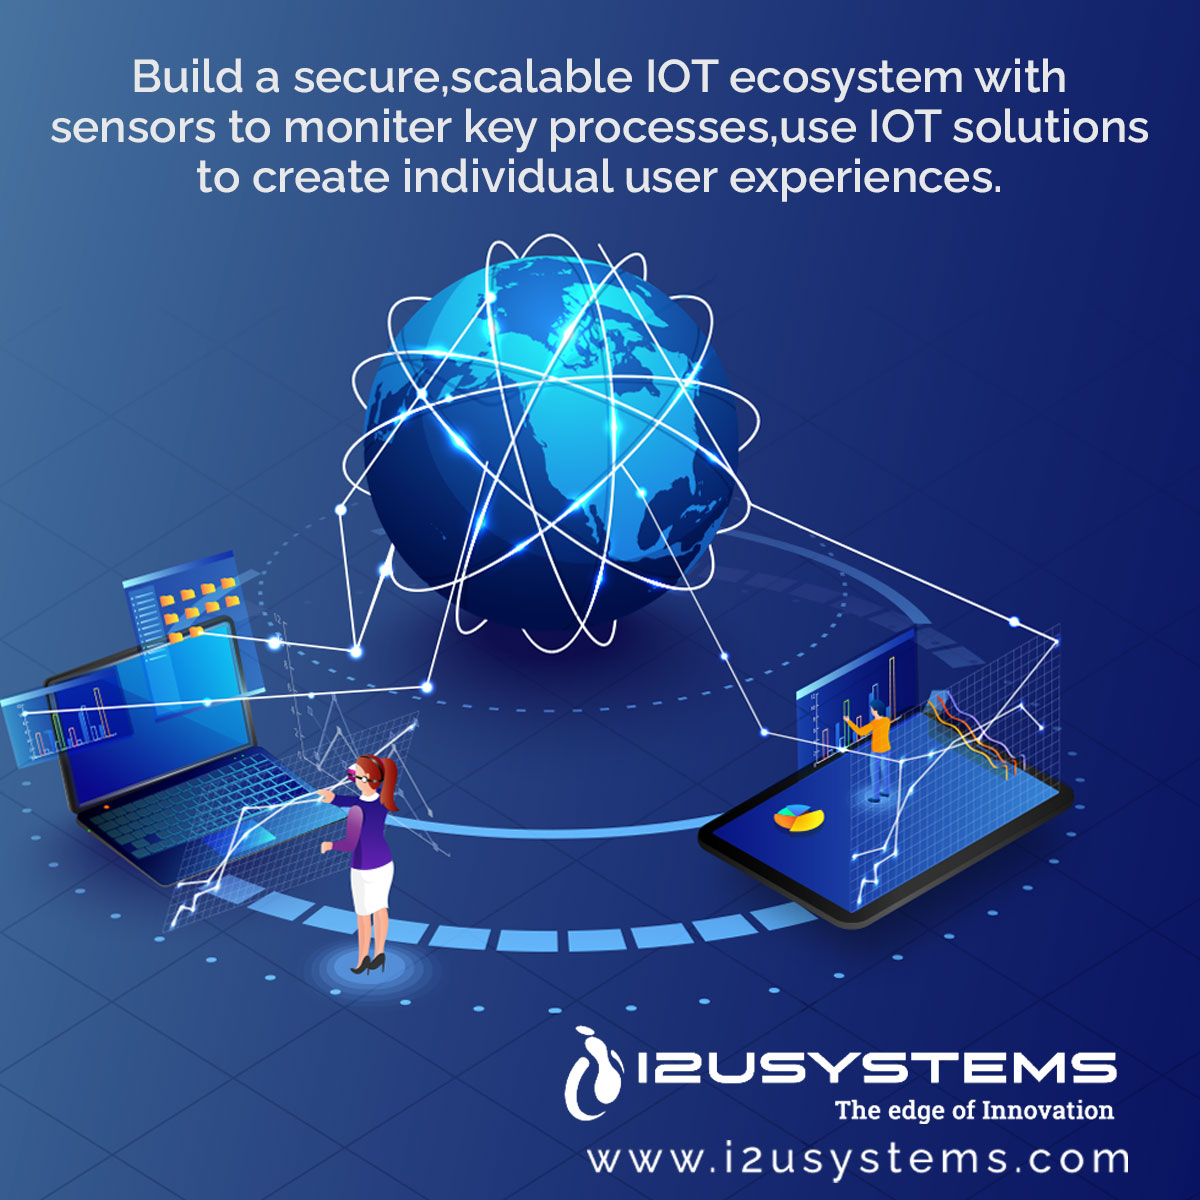 Build a secure,scalable IOT ecosystem with sensors to moniter key processes,use IOT solutions to create individual user experiences. #i2usystems #c2crequirements #w2jobs #directclient #directclients #benchsales #IOT #ecosystem #solutions #experiences #individual